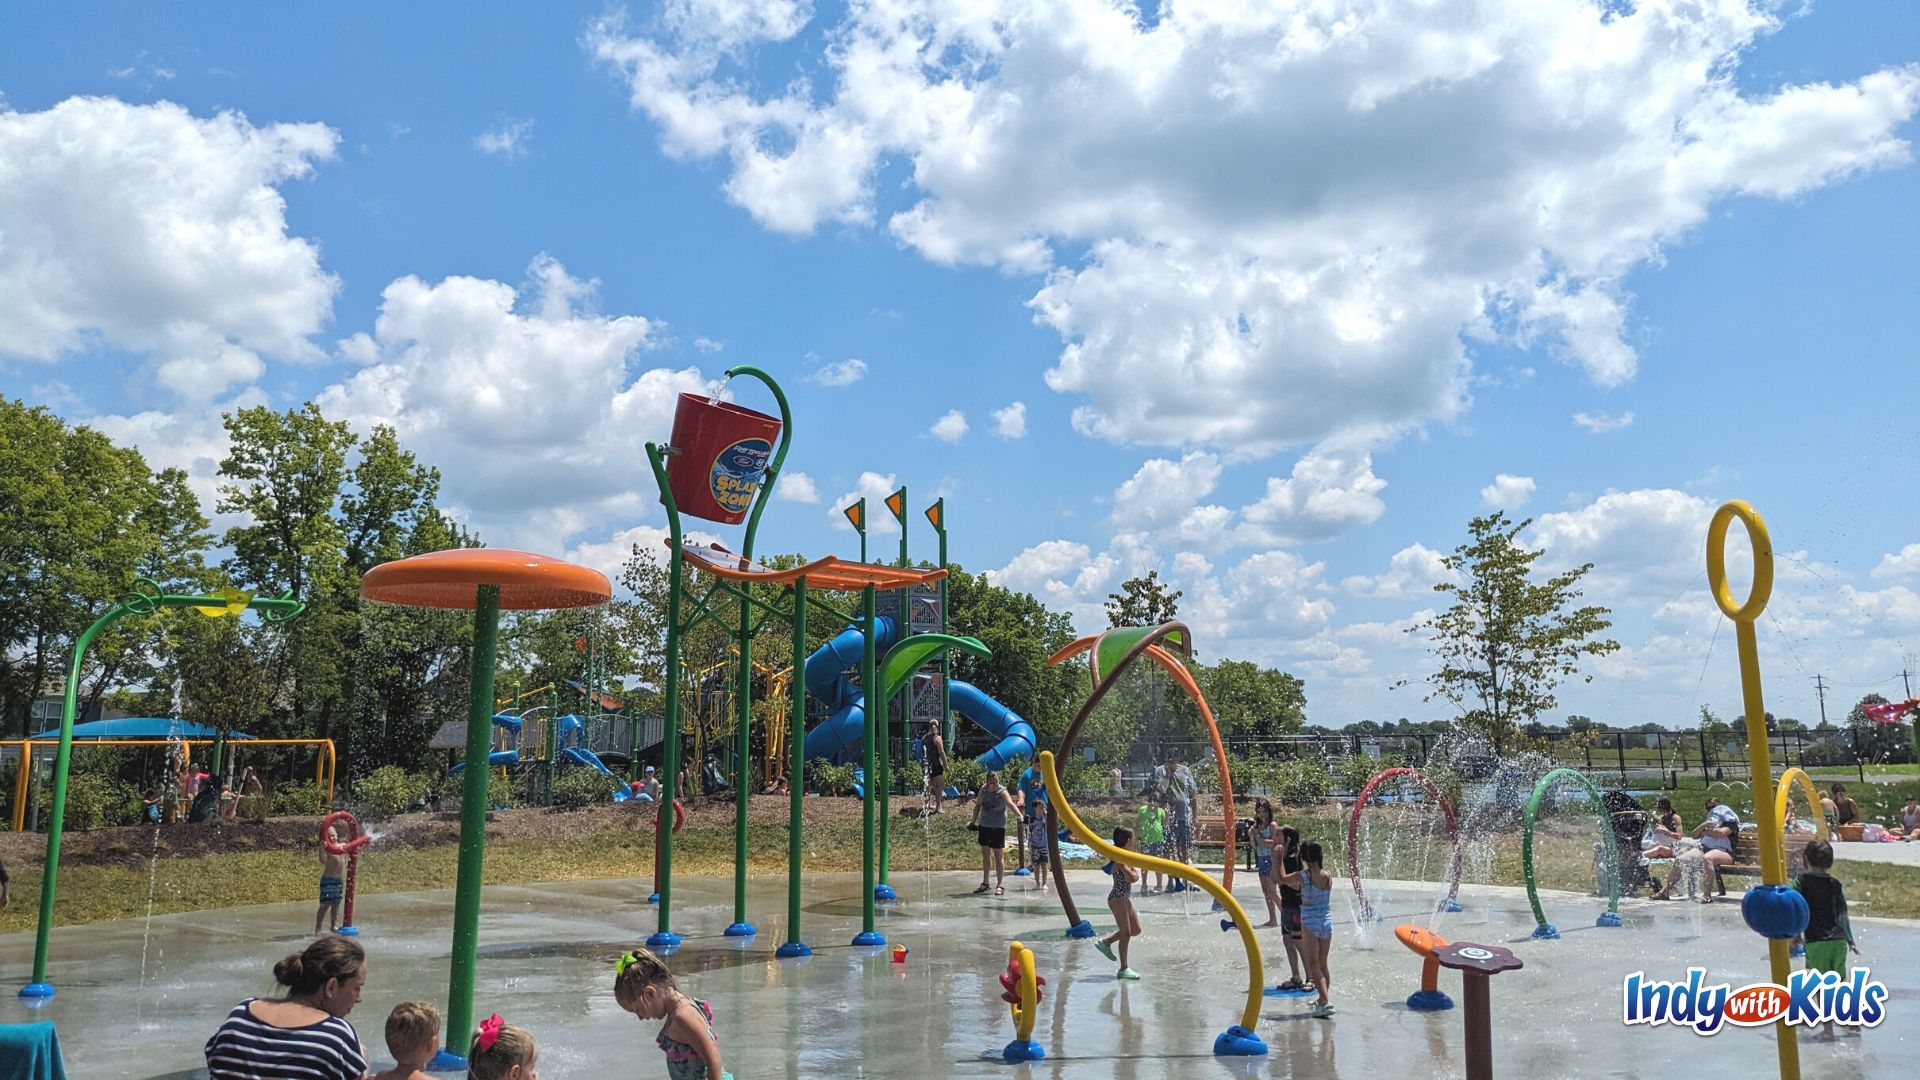 Kephart Park in Bargersville has a large playground and splash pad.